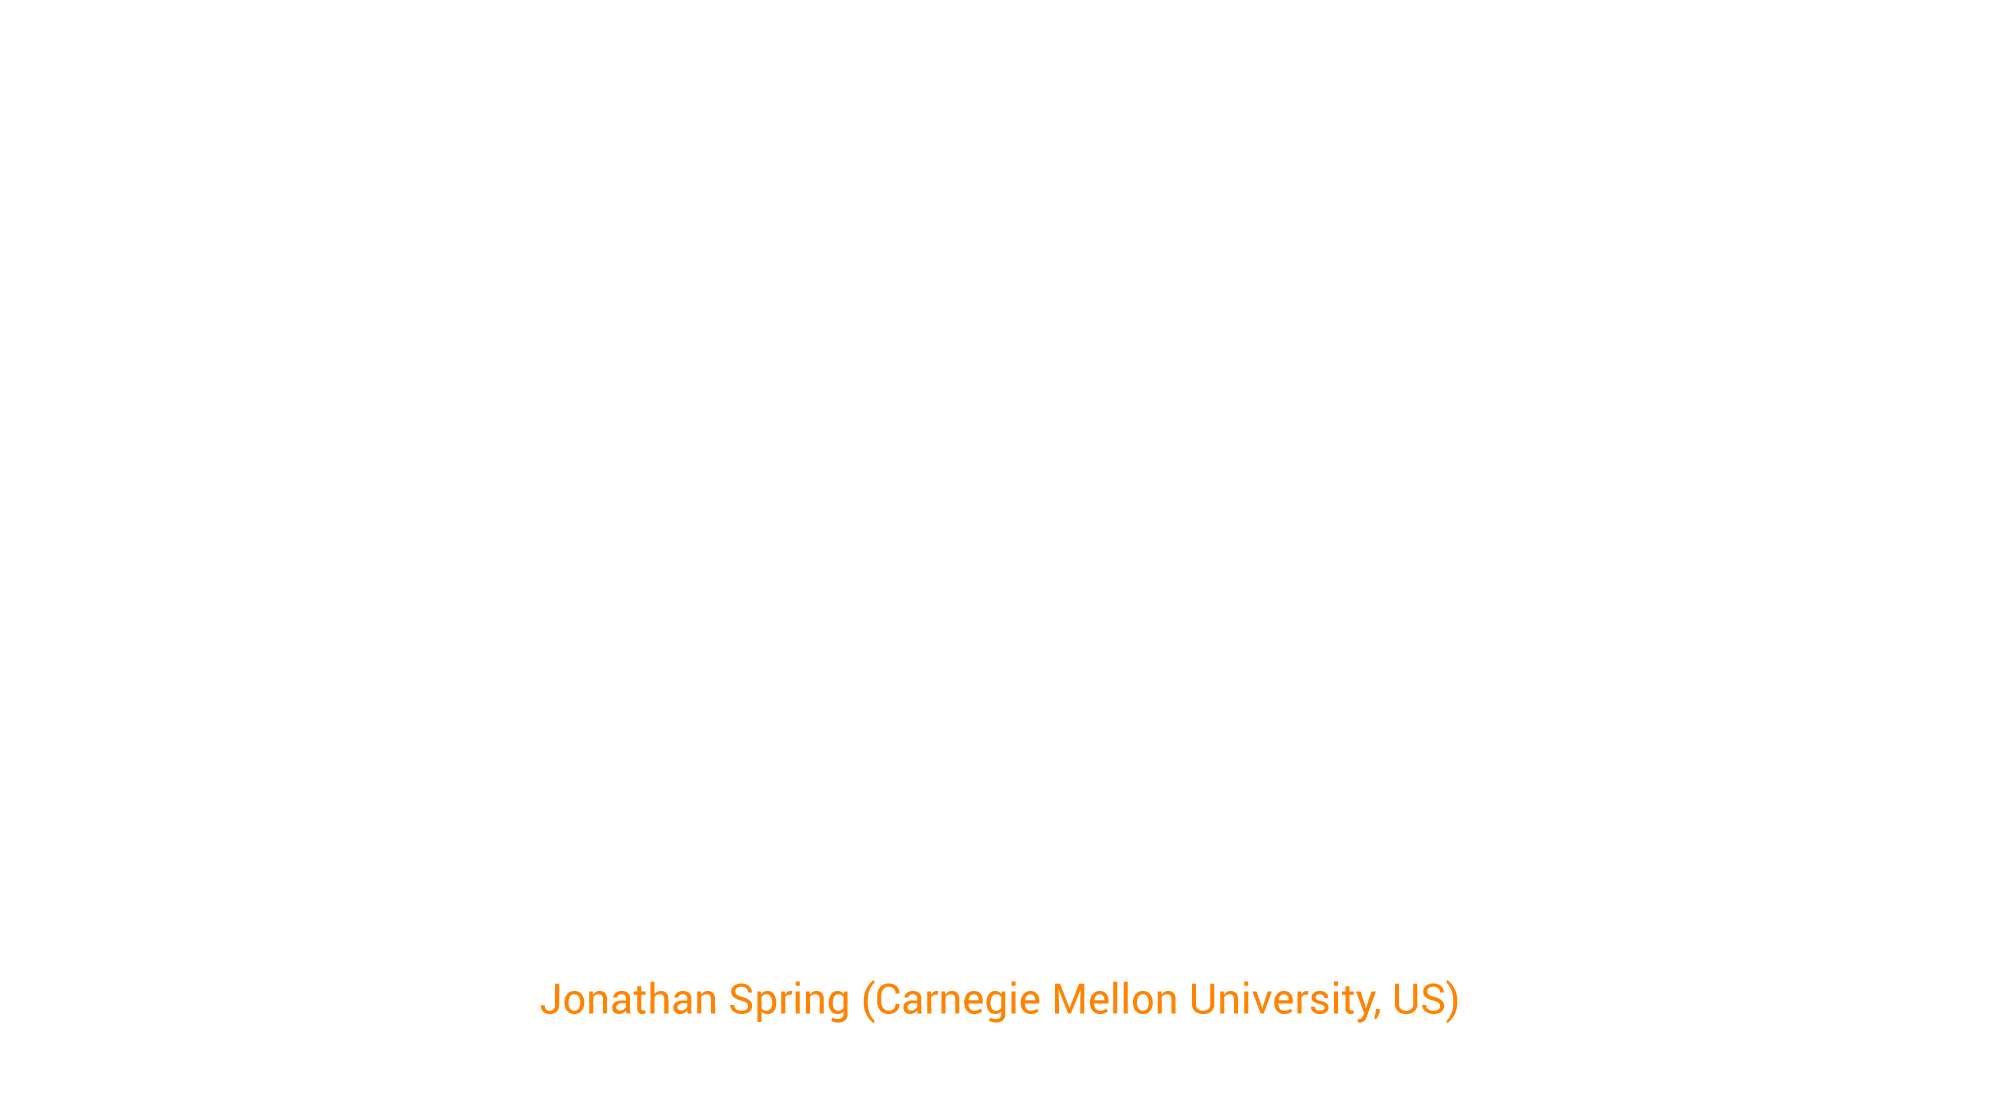 Prioritizing Vulnerability Response with a Stakeholder Specific Vulnerability Categorization